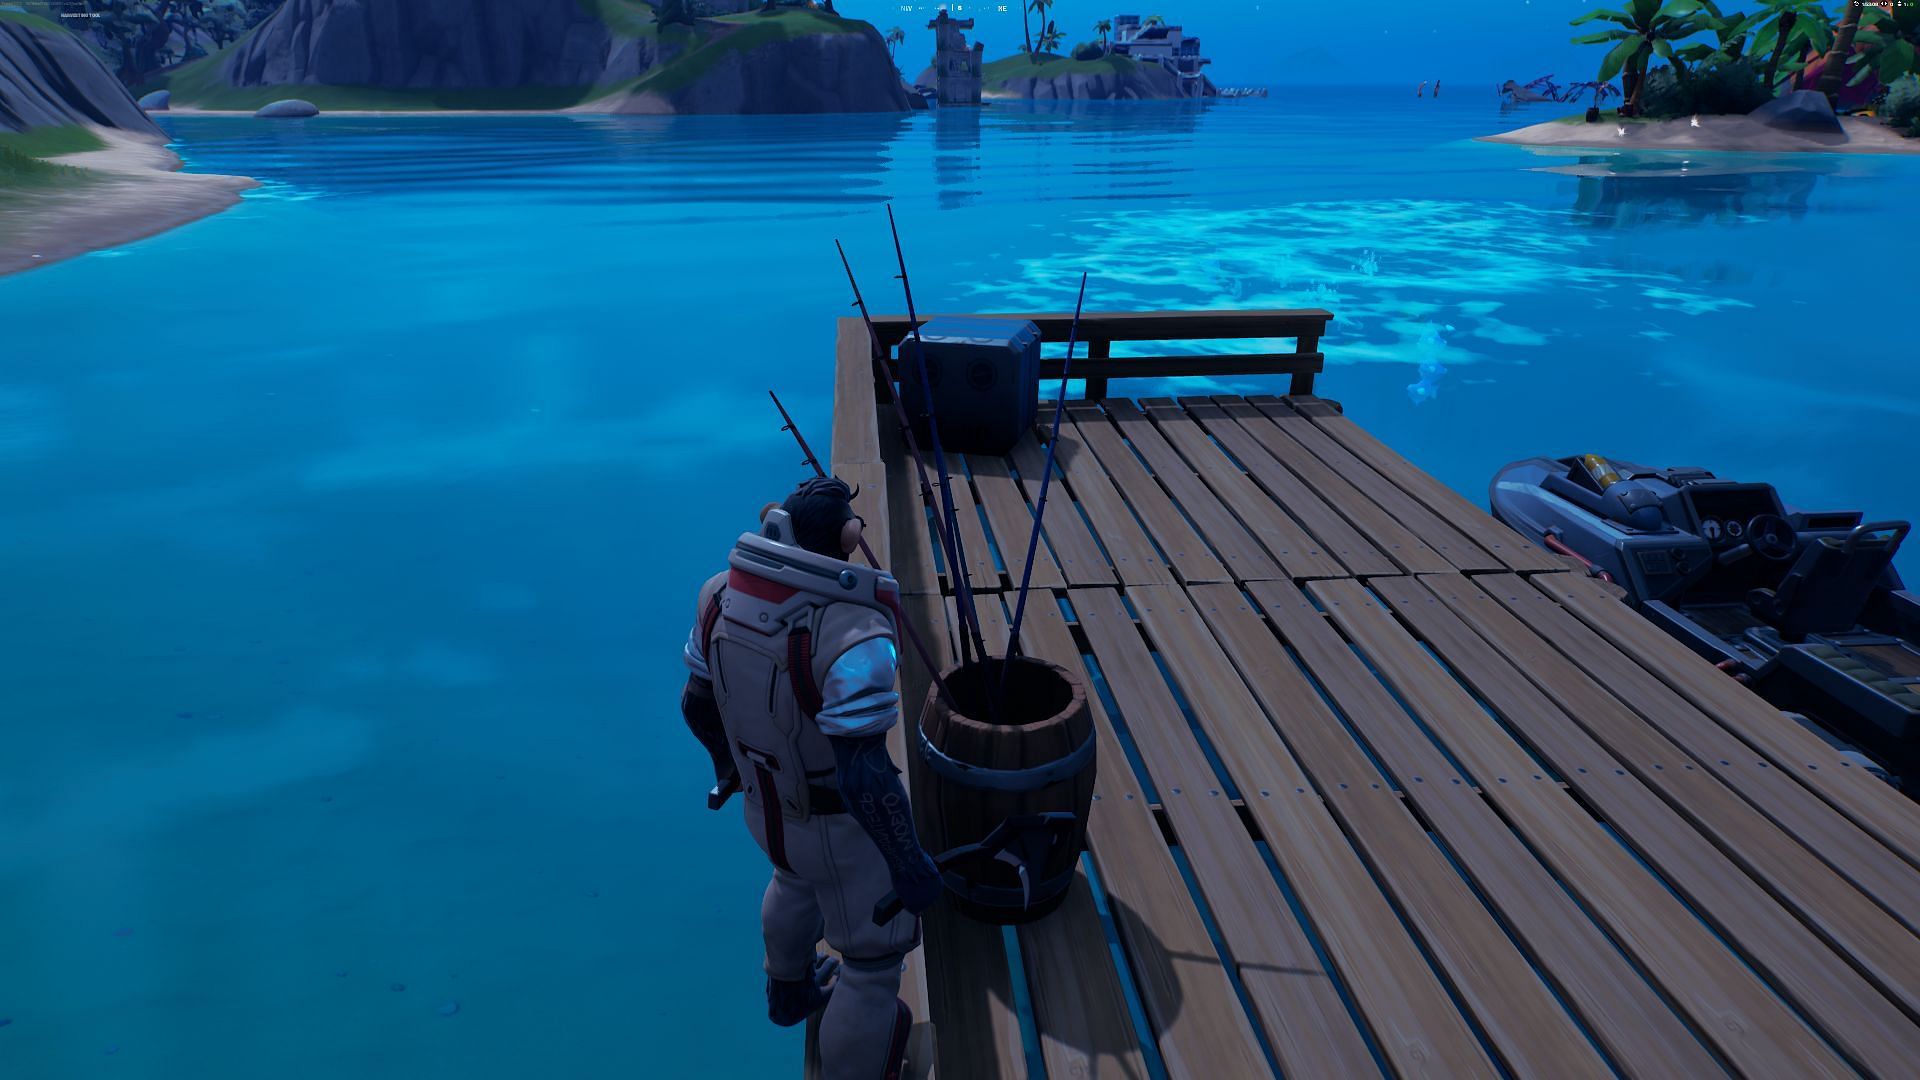 Search fishing barrels for fishing supplies and start fishing (Image via Epic Games)